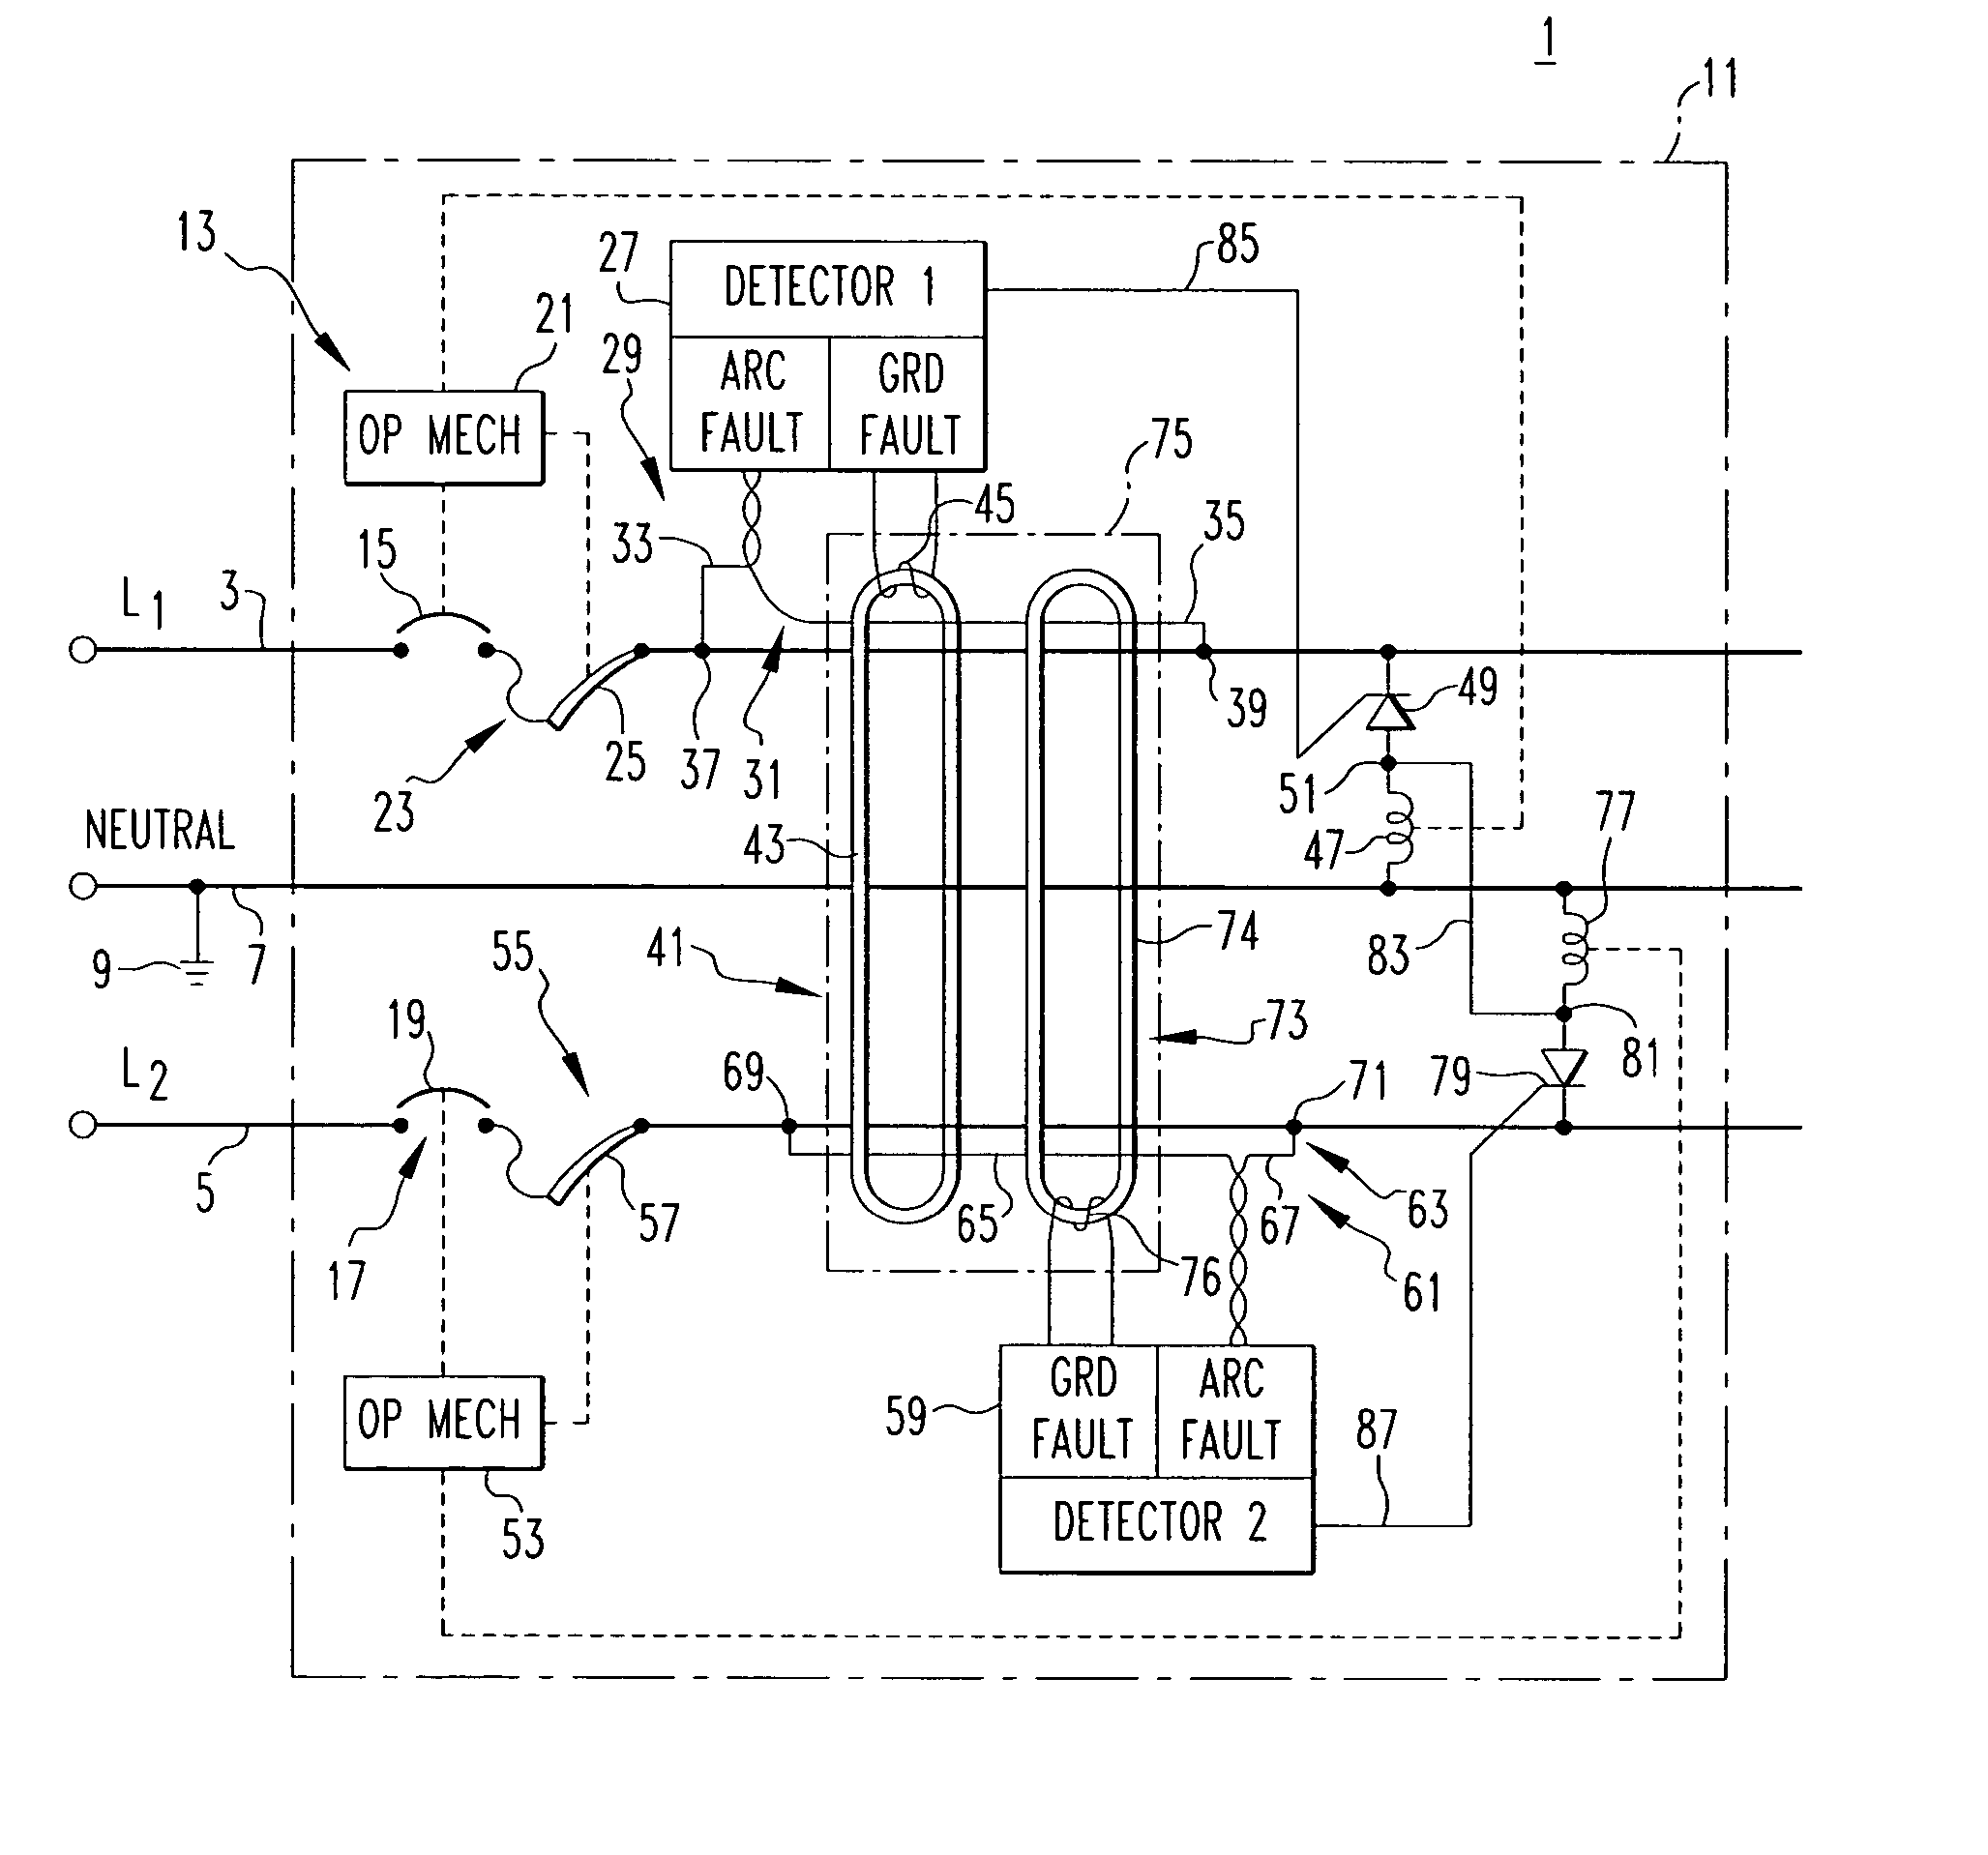 Fault detector for two line power distribution system and protection apparatus incorporating the same